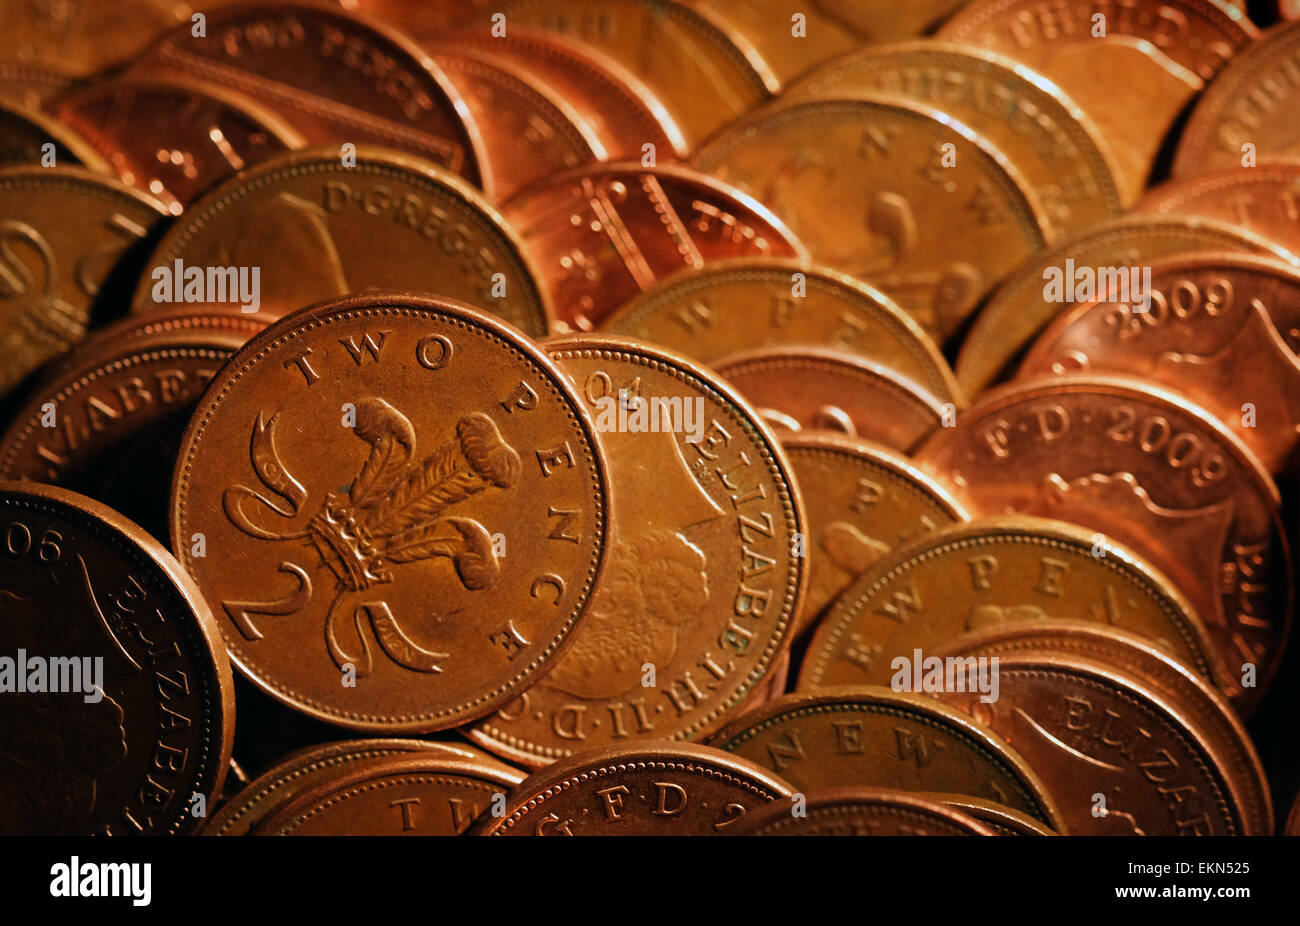 Two pence coins in amusement arcade machine. Stock Photo